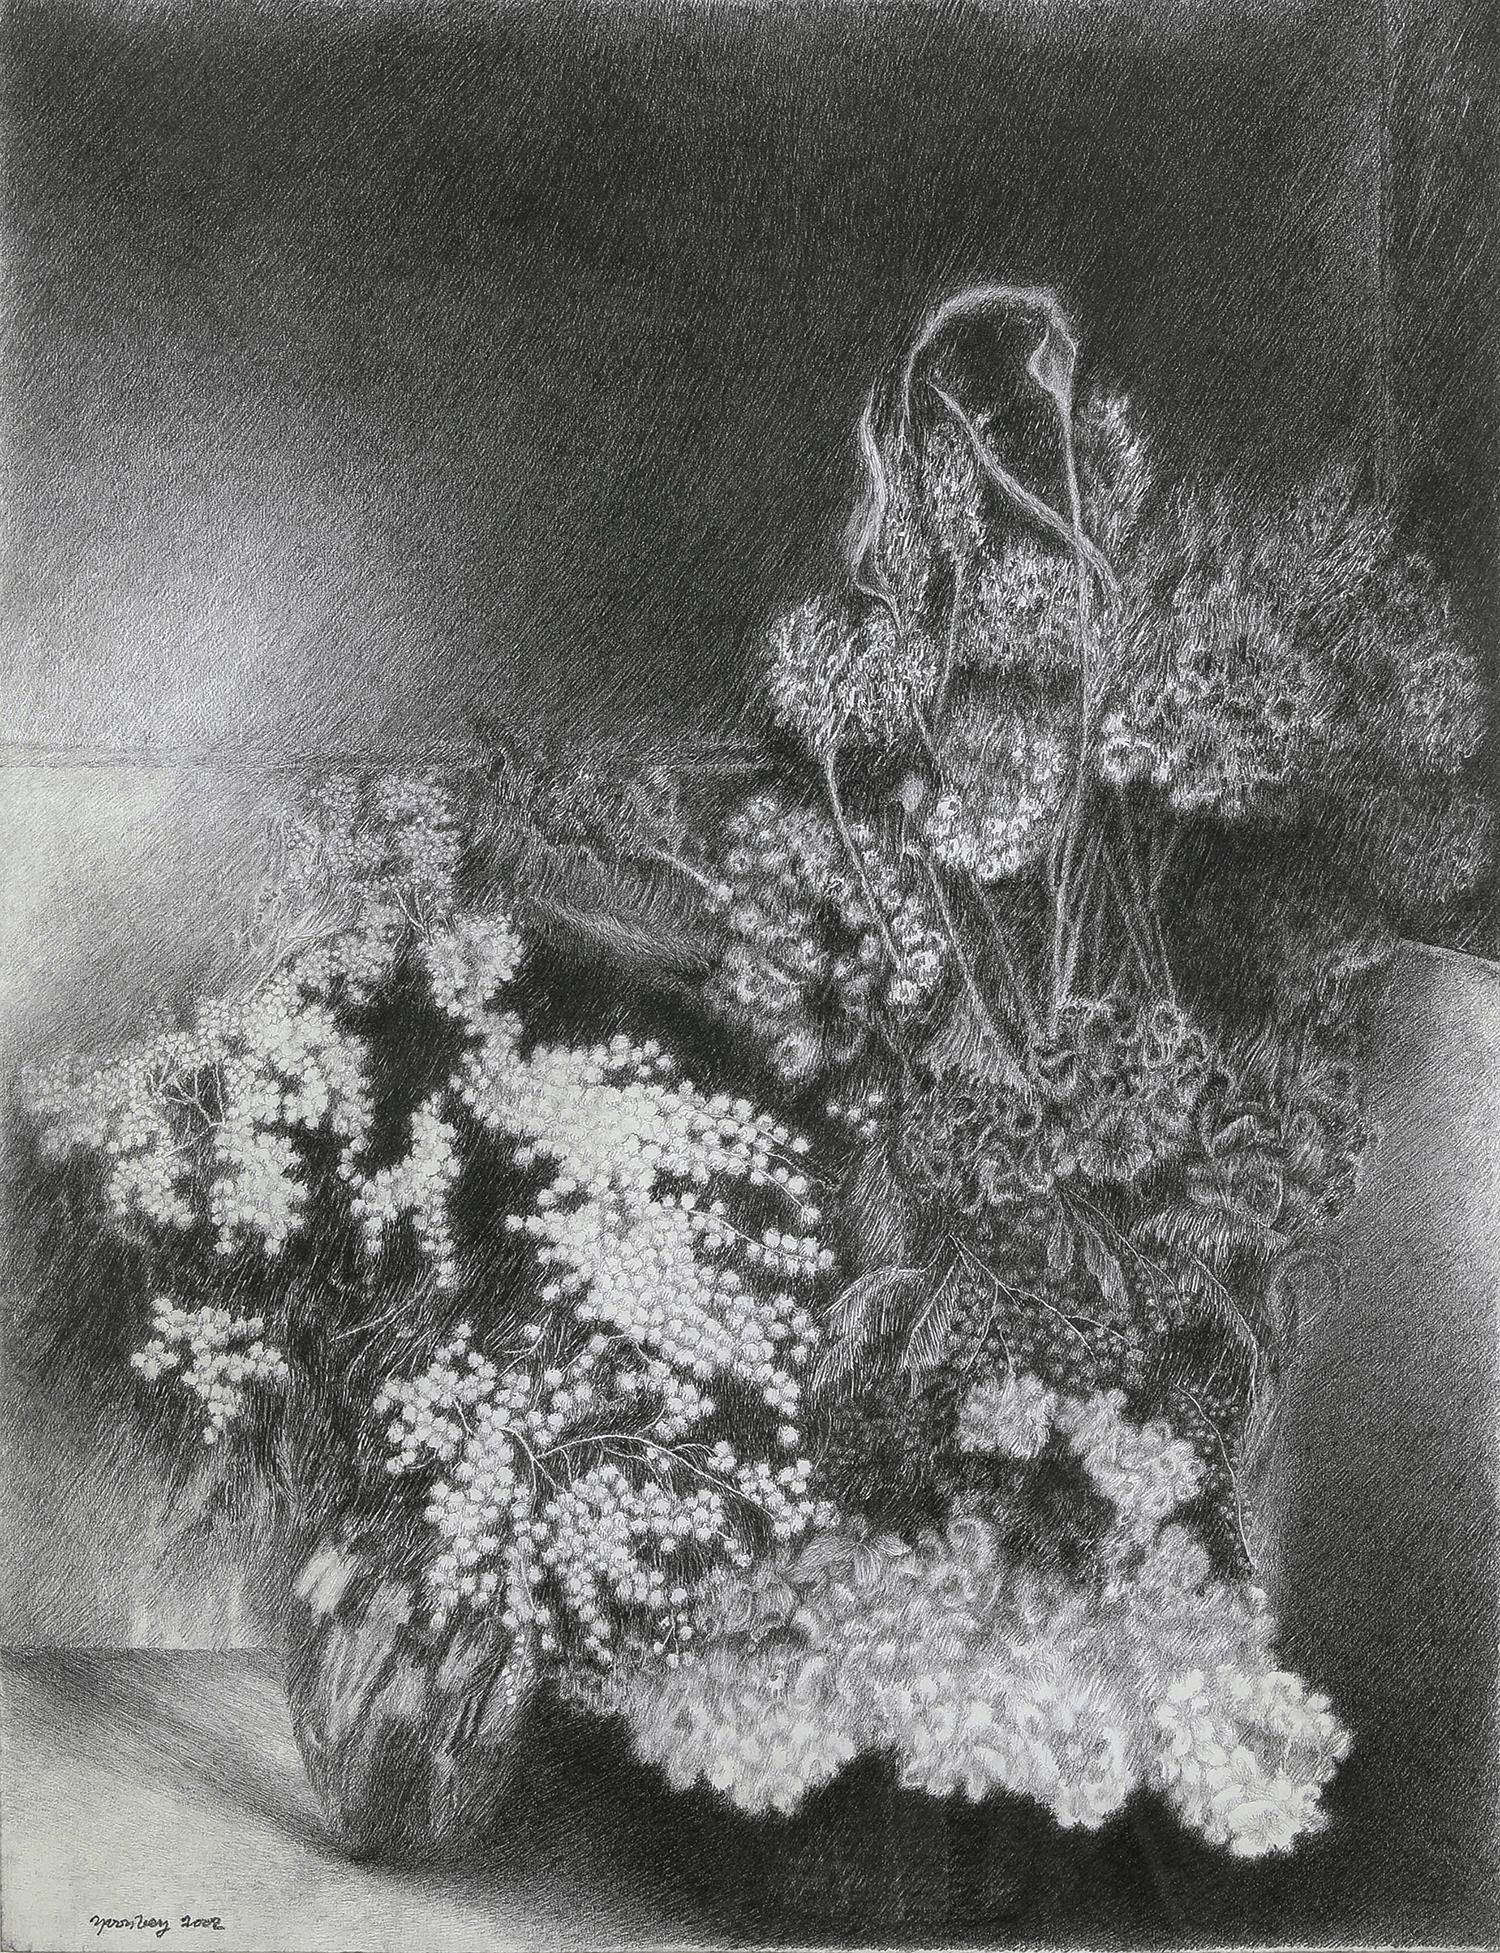 Black and white still life flower drawing of Mimosas by artist, Yvon Pissarro